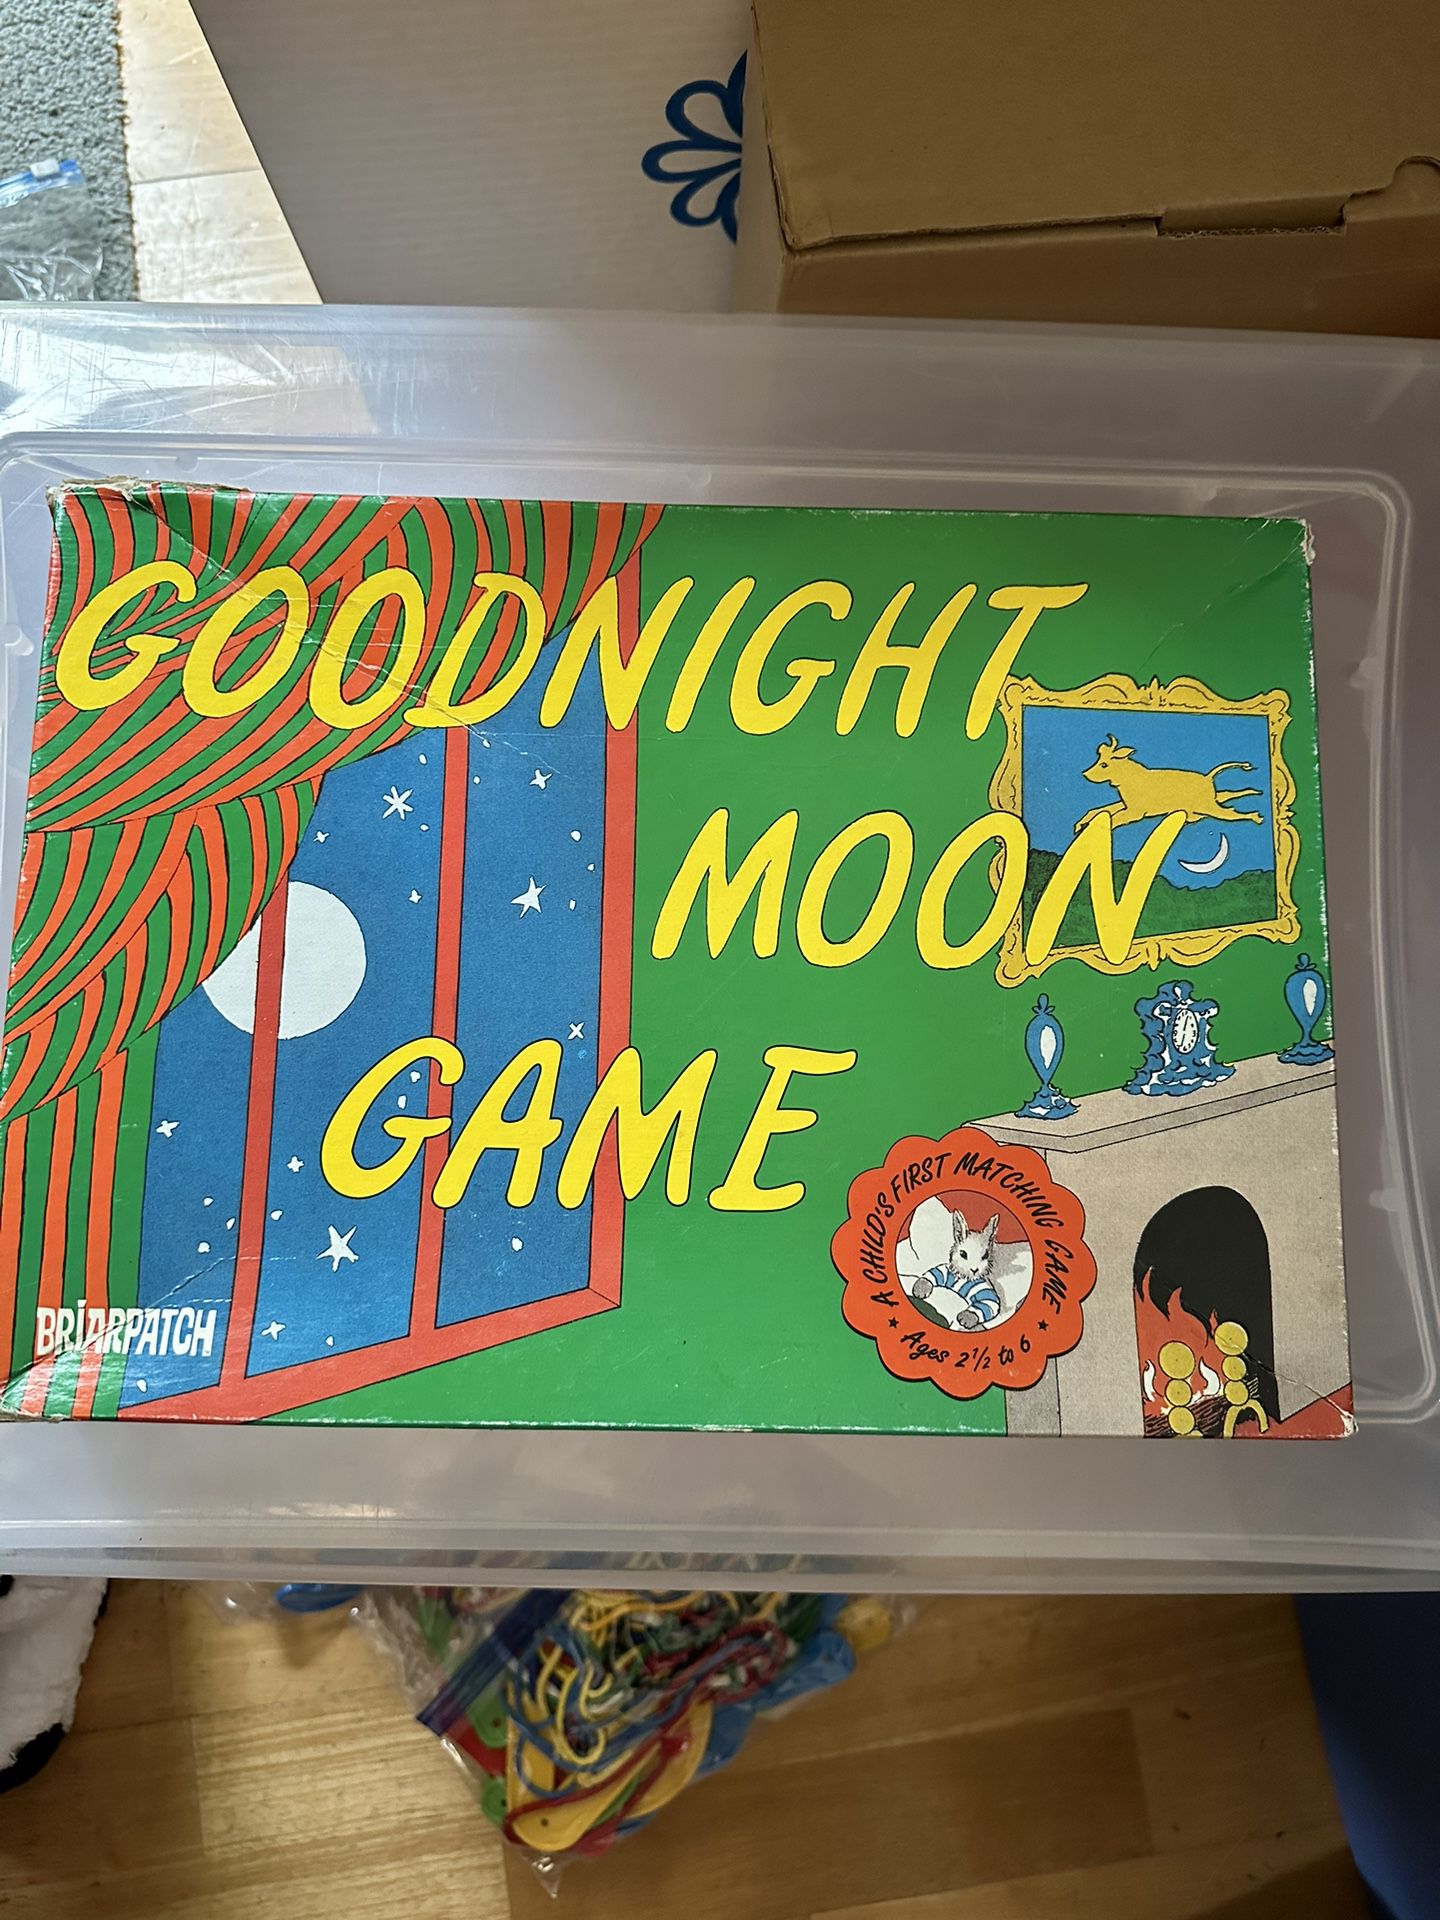 Goodnight moon game $15. Retails For $24